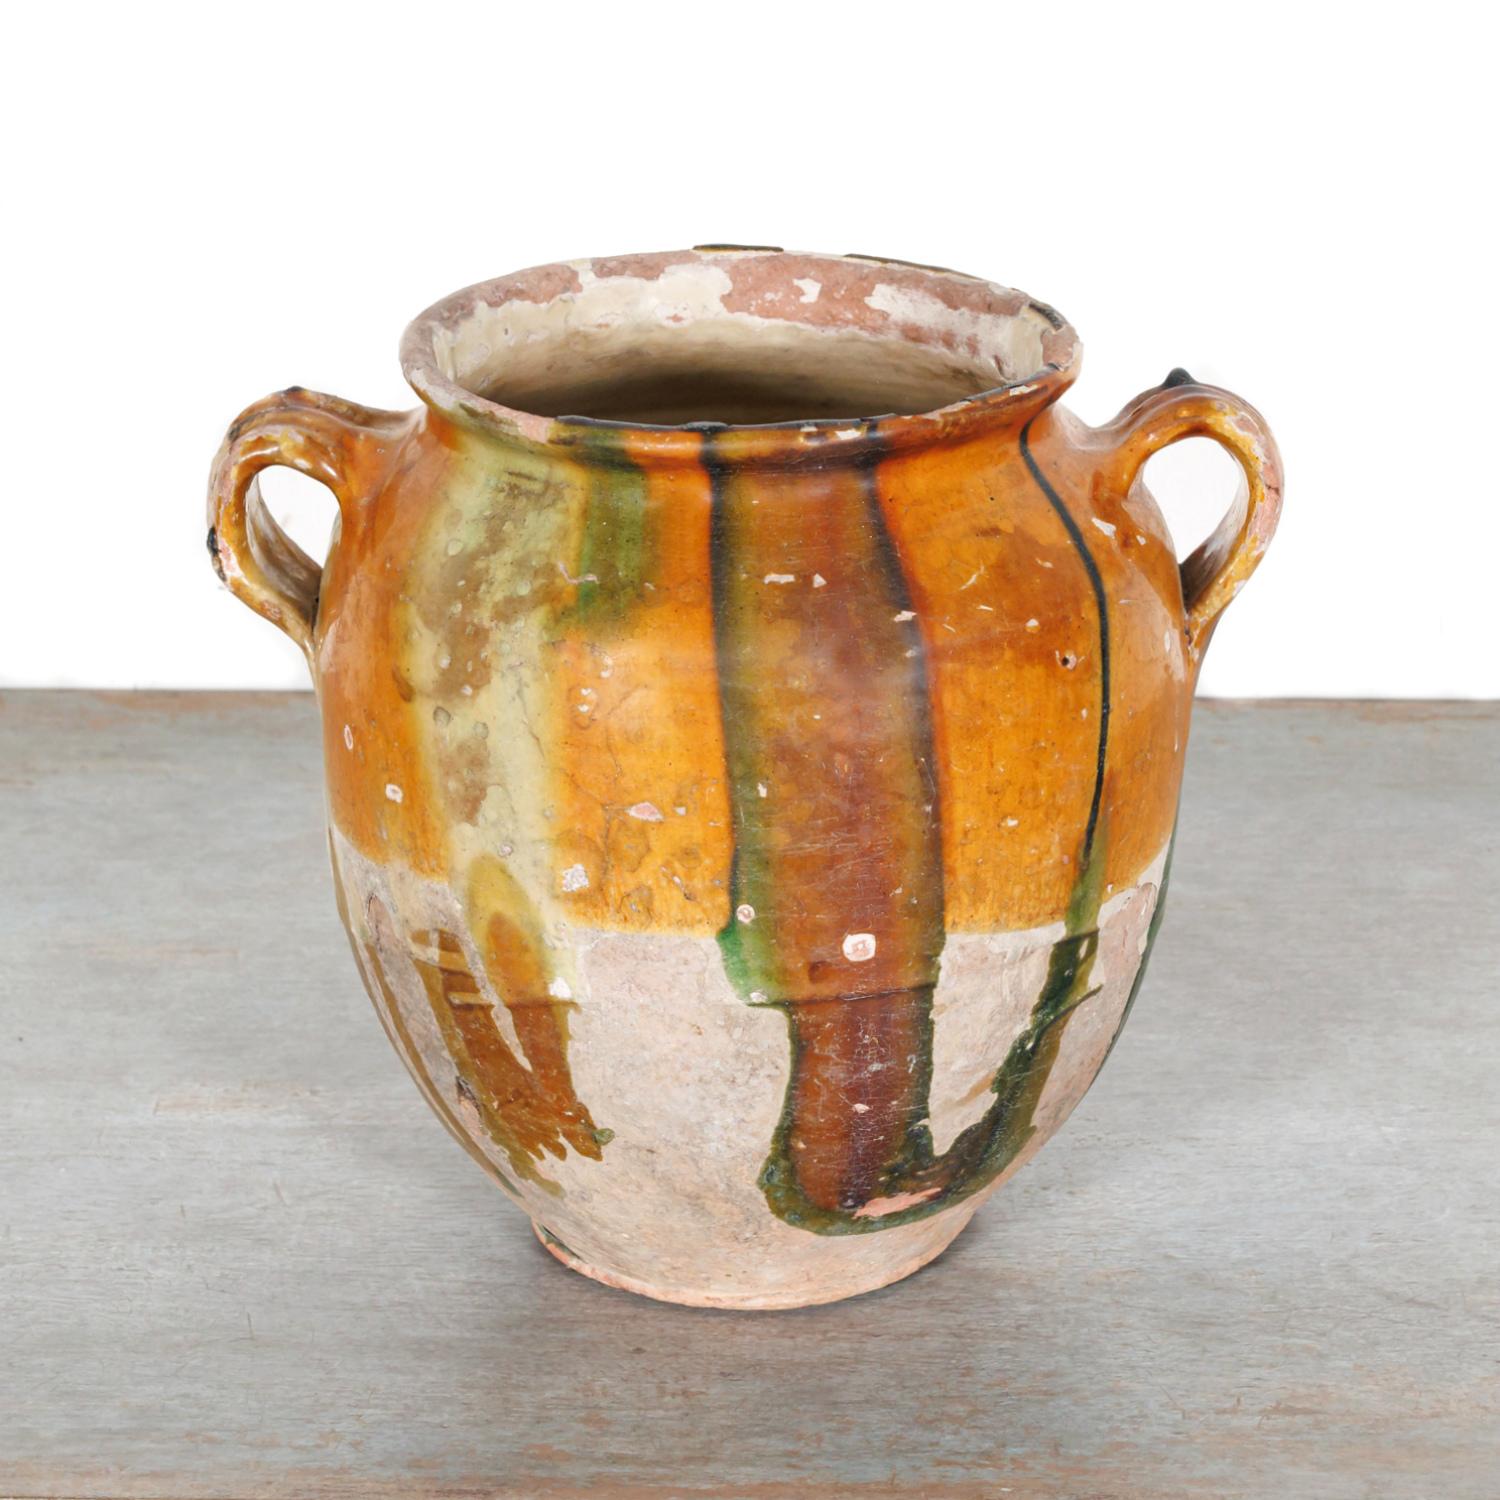 A colorful 19th century French pot de confit or confit pot from southwest France having two handles and a yellow ochre glaze with green and caramel drips, circa 1870s. Utilitarian earthenware vessels like this were once a staple in French kitchens,